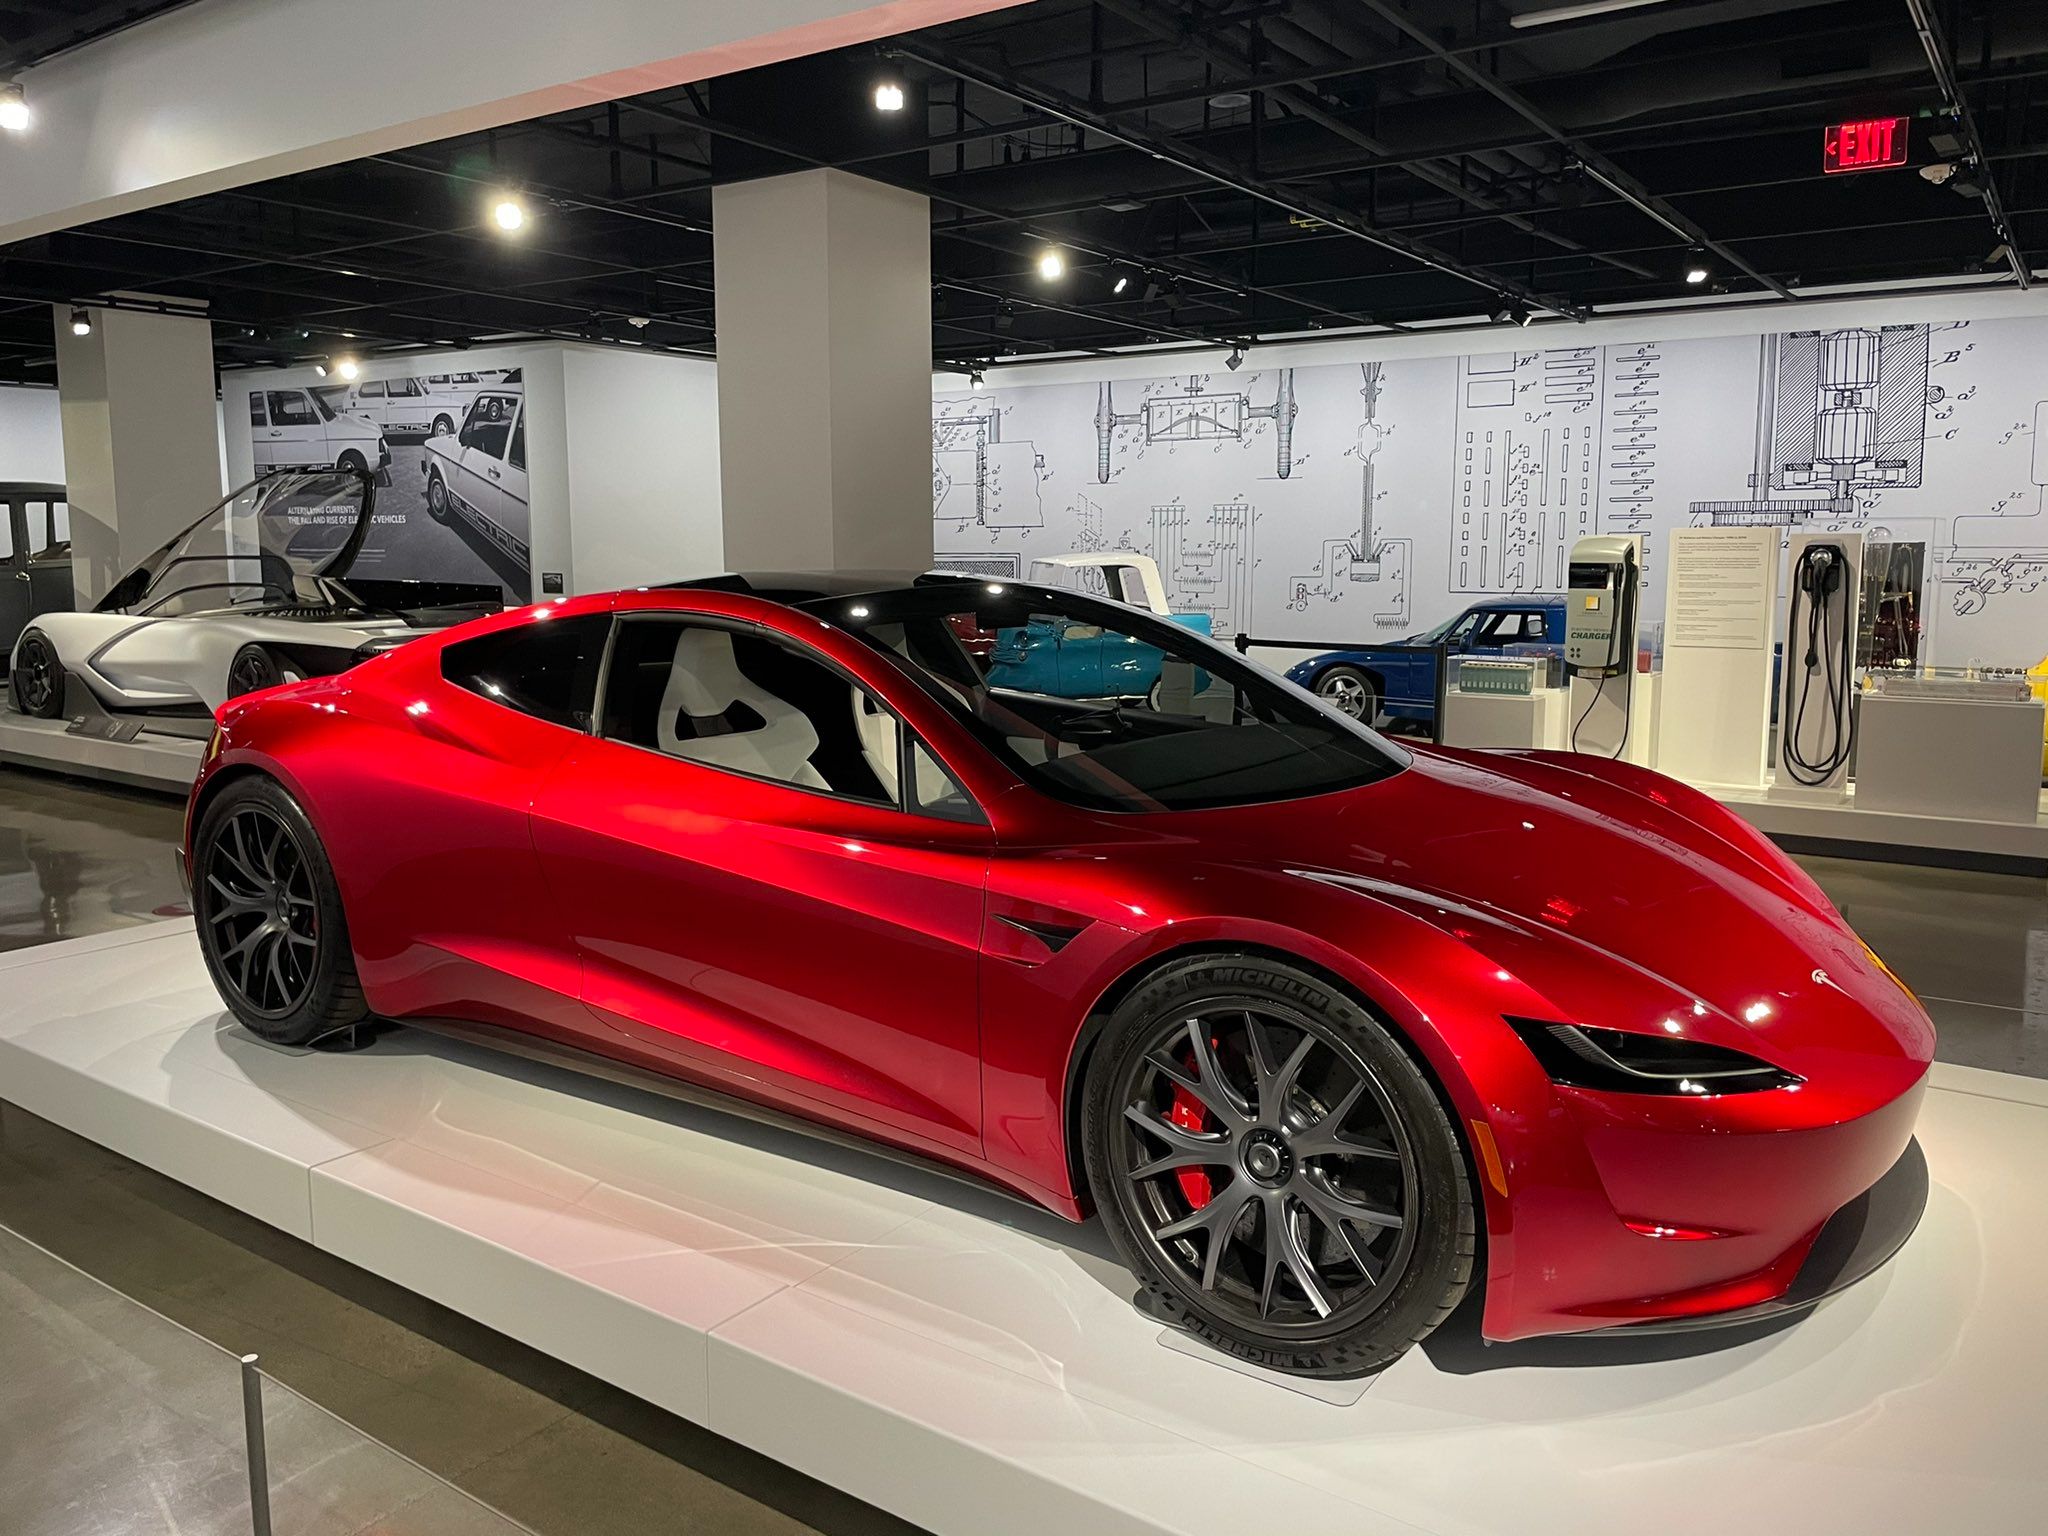 Red Tesla Roadster 2022 at the museum